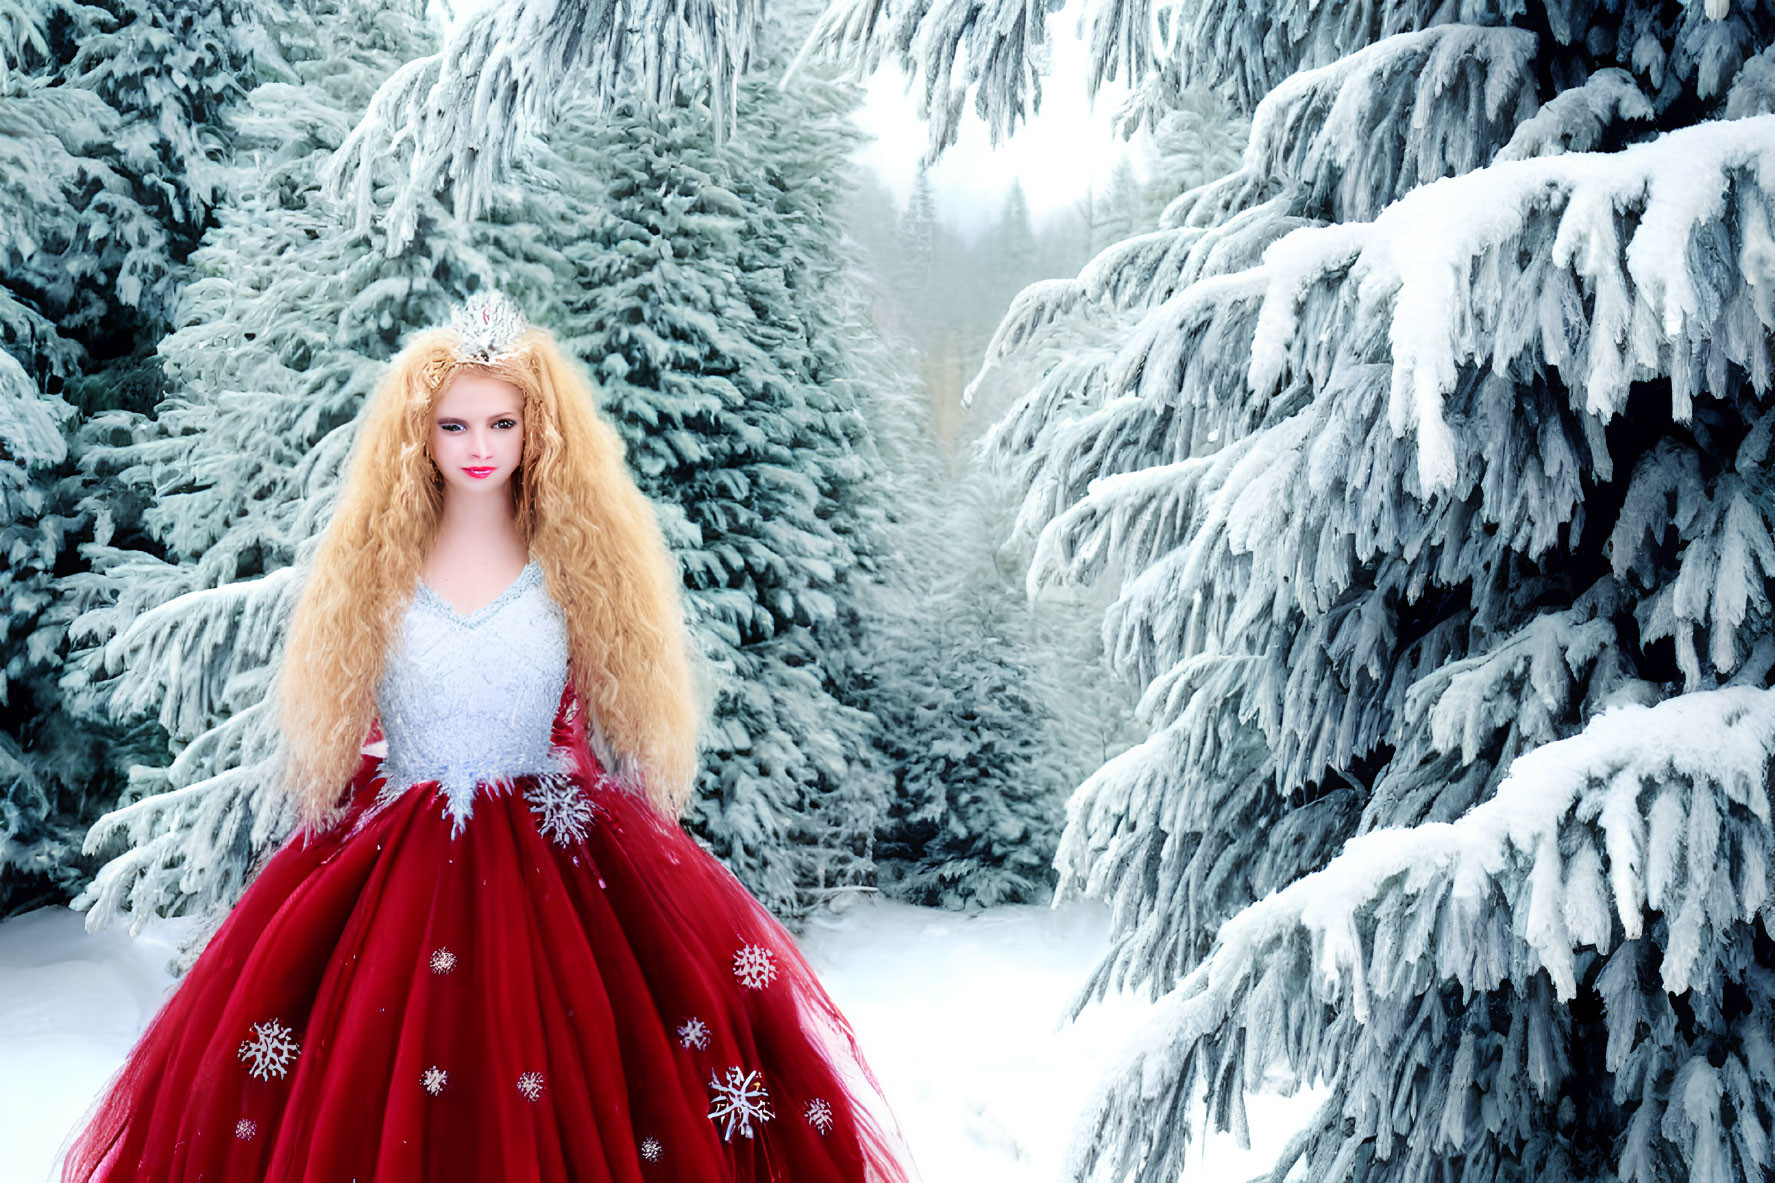 Blonde woman in red gown among snow-covered trees - winter fairy-tale scene